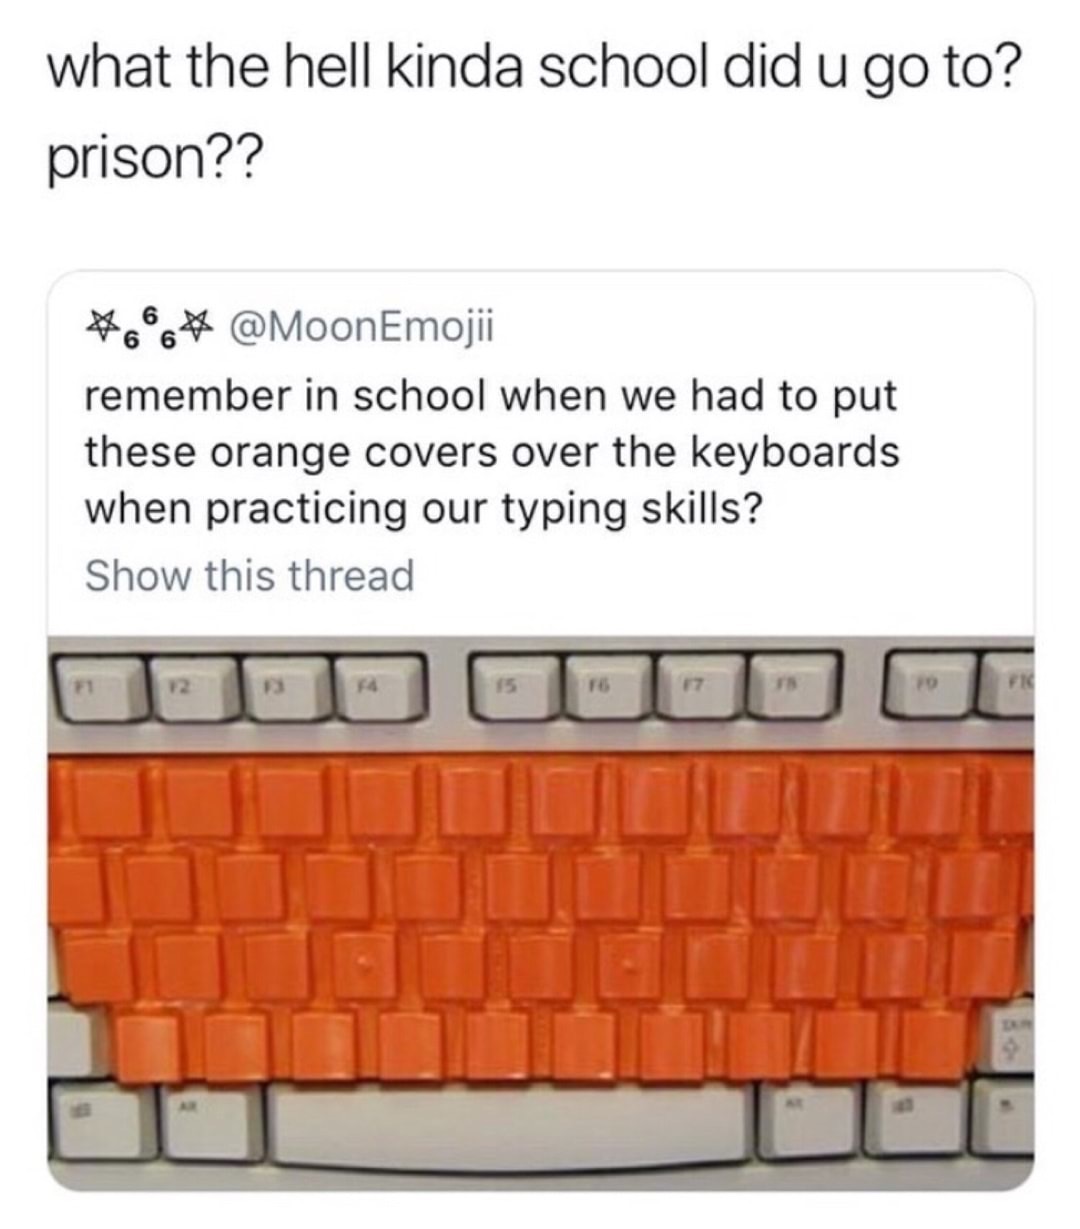 funny meme - keyboard cover meme - what the hell kinda school did u go to? prison?? 666# remember in school when we had to put these orange covers over the keyboards when practicing our typing skills? Show this thread 10